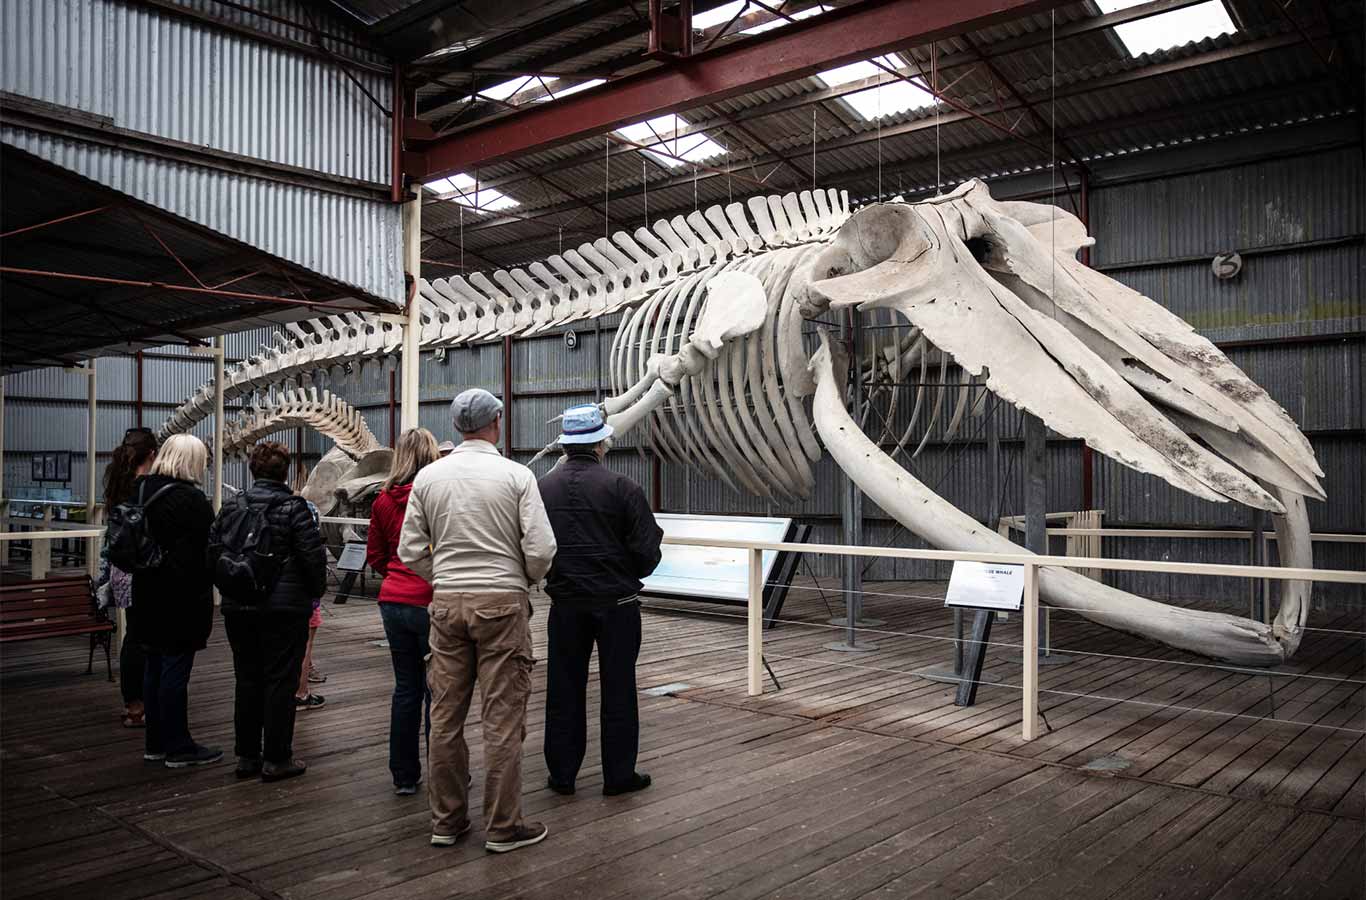 Whale museum Albany